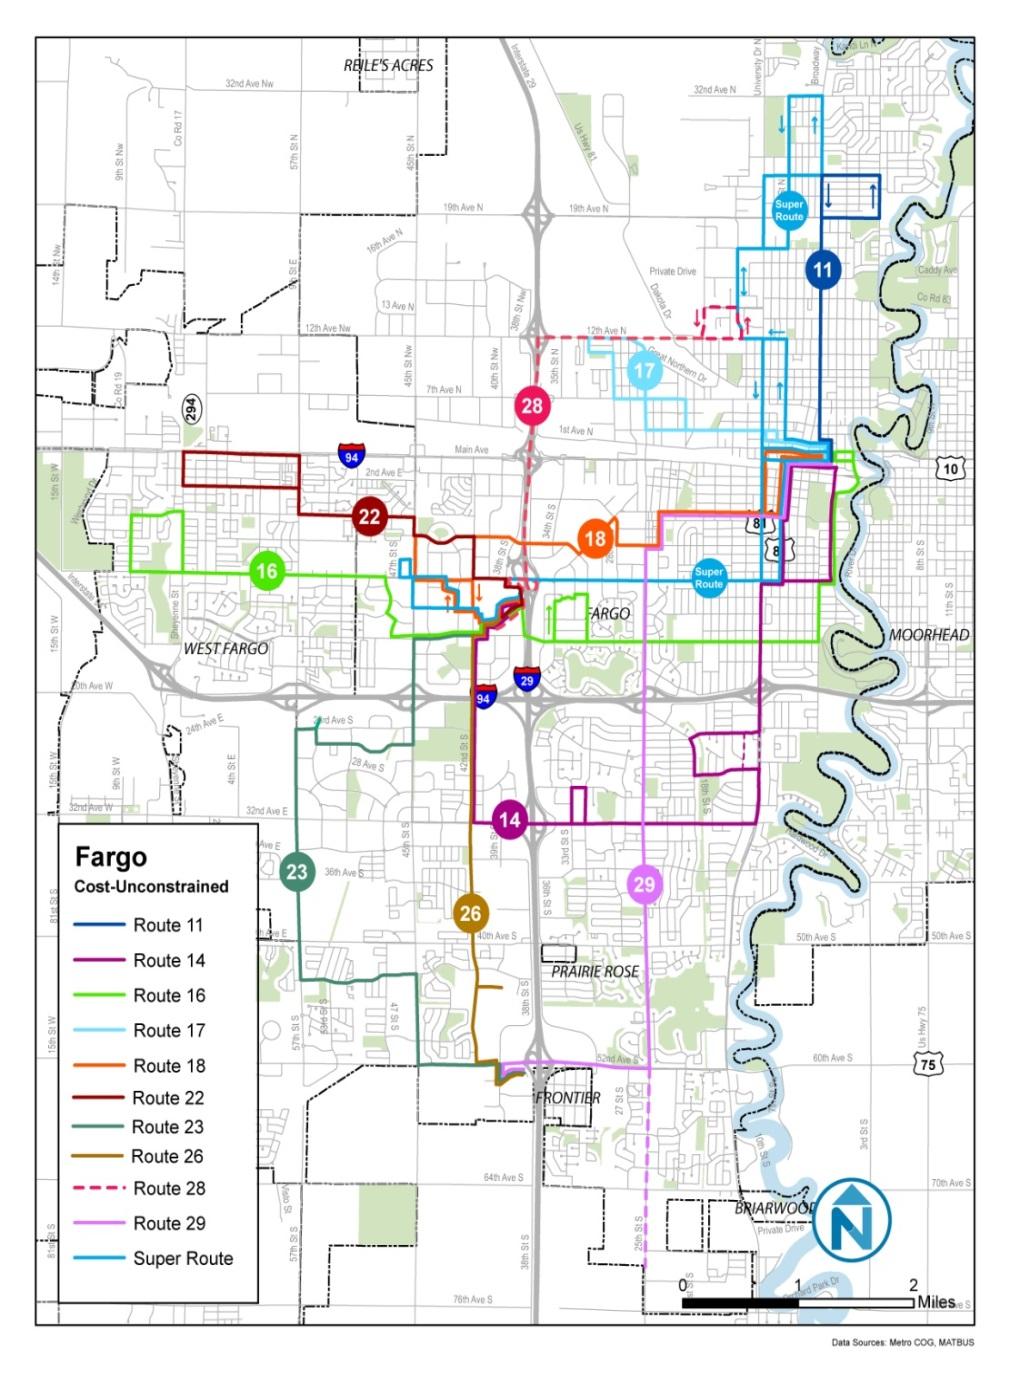 Map 5 TDP Recommended Routes Source: 2012 2016 TDP Proposed Route 26 As recommended in the TDP Route 26 would serve southwest Fargo.